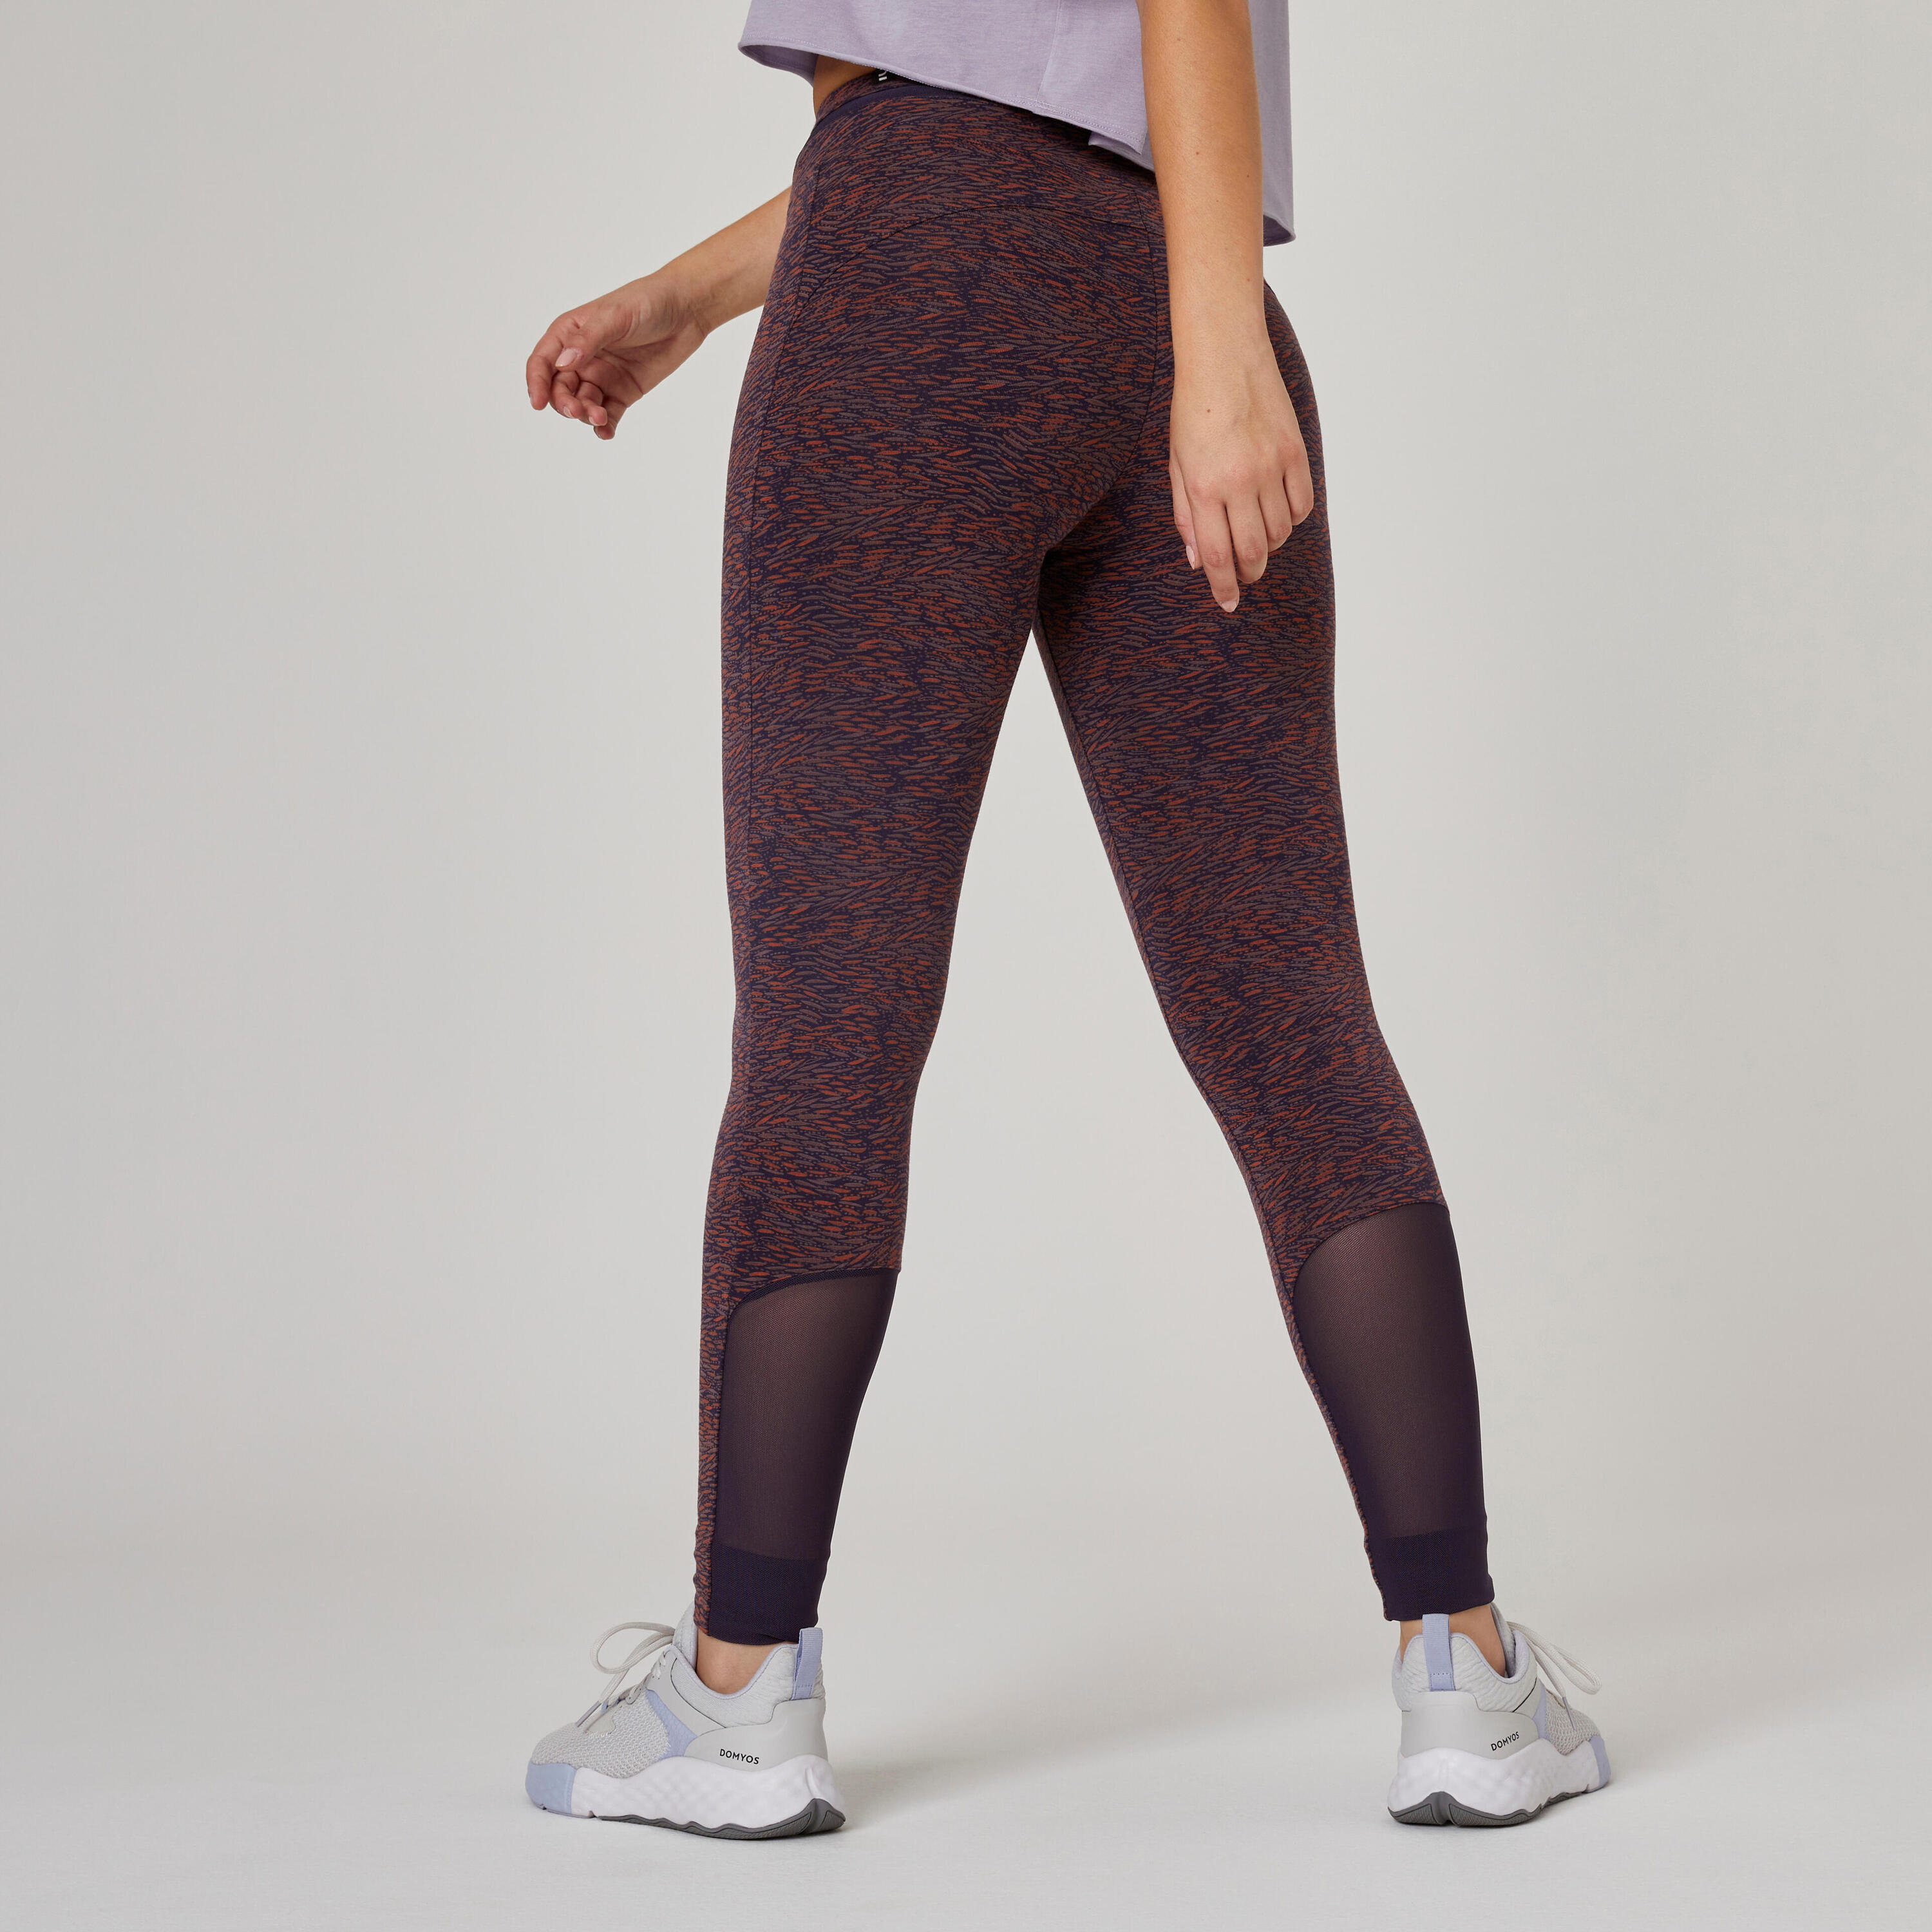 Stretchy High-Waisted Cotton Fitness Leggings with Mesh - Blue Print 2/7